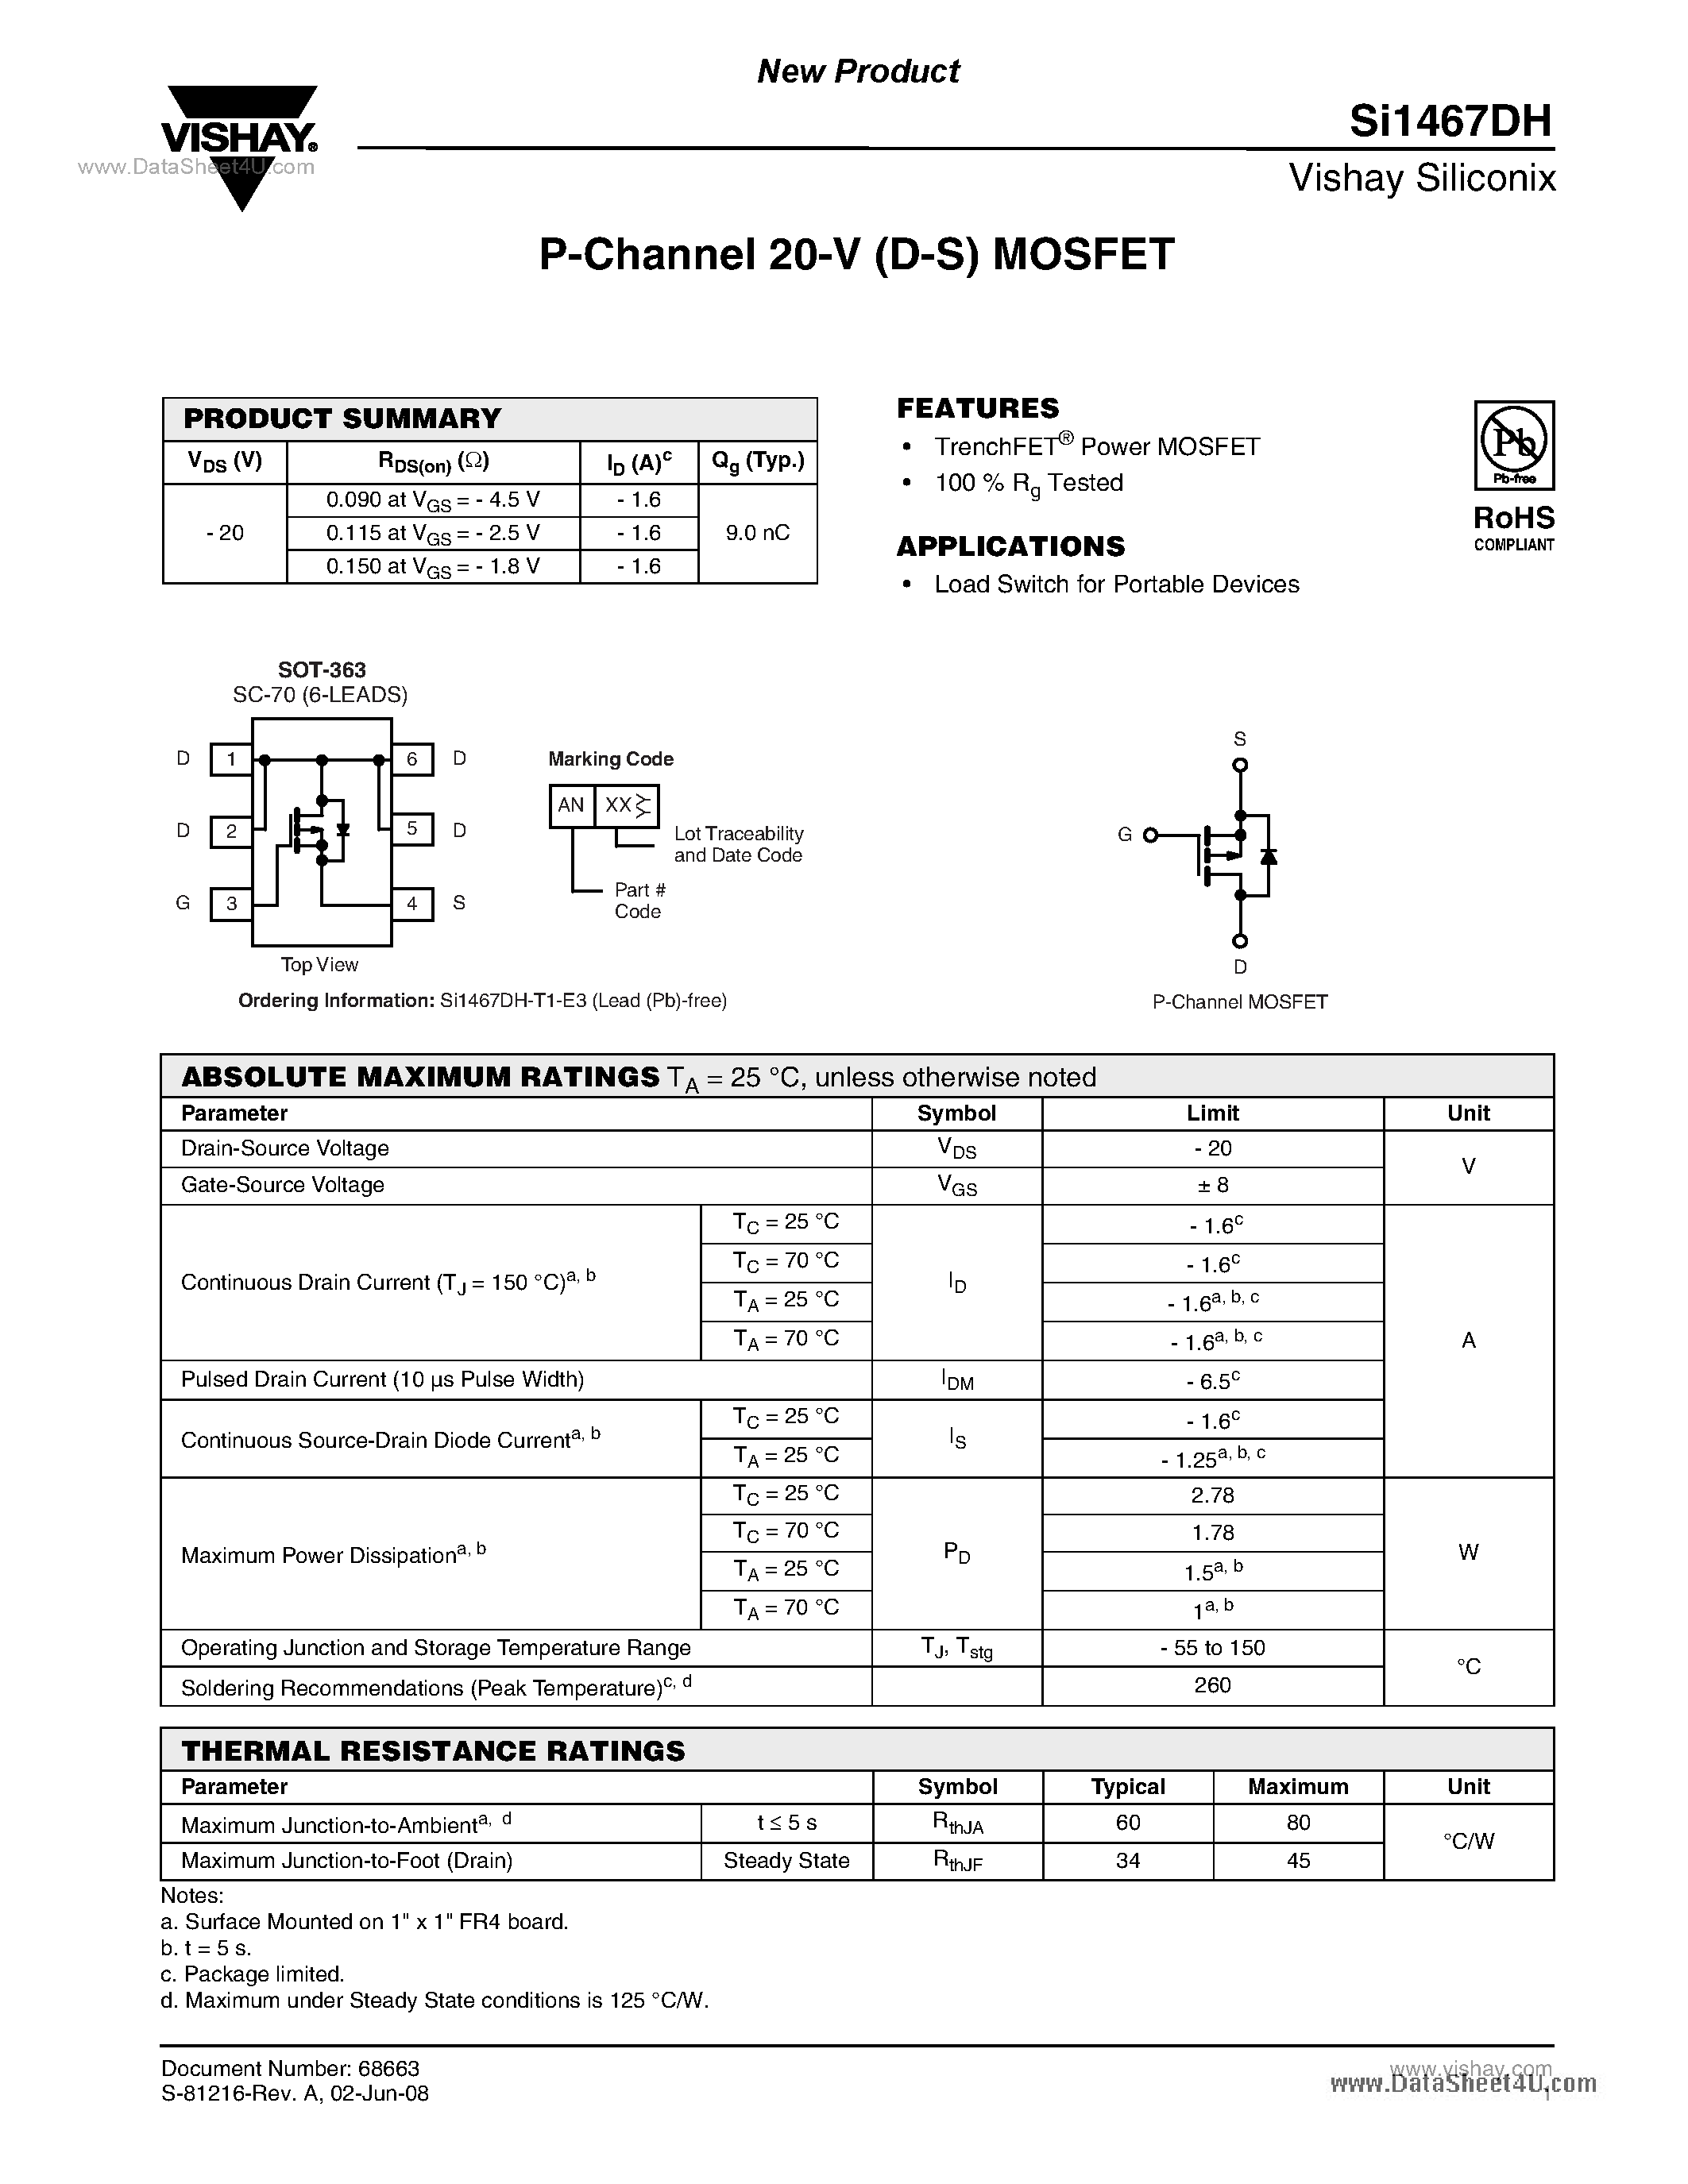 Datasheet SI1467DH - P-Channel 20-V (D-S) MOSFET page 1